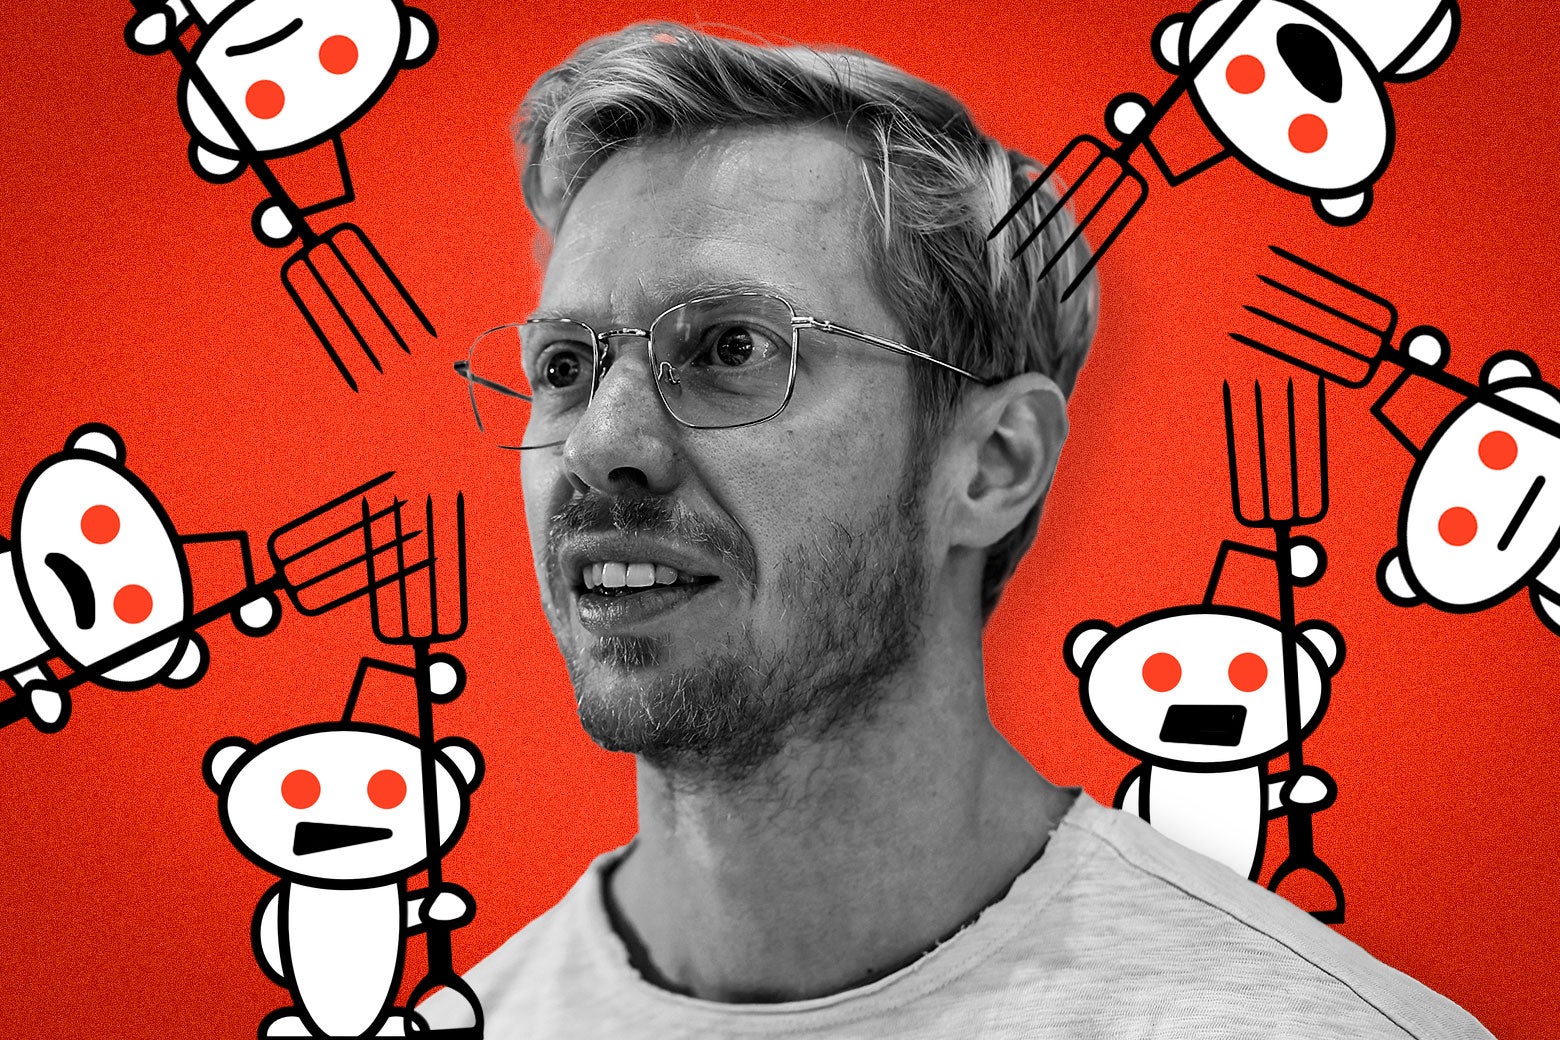 Reddit protests: Why users think CEO Steve Huffman is a supervillain.